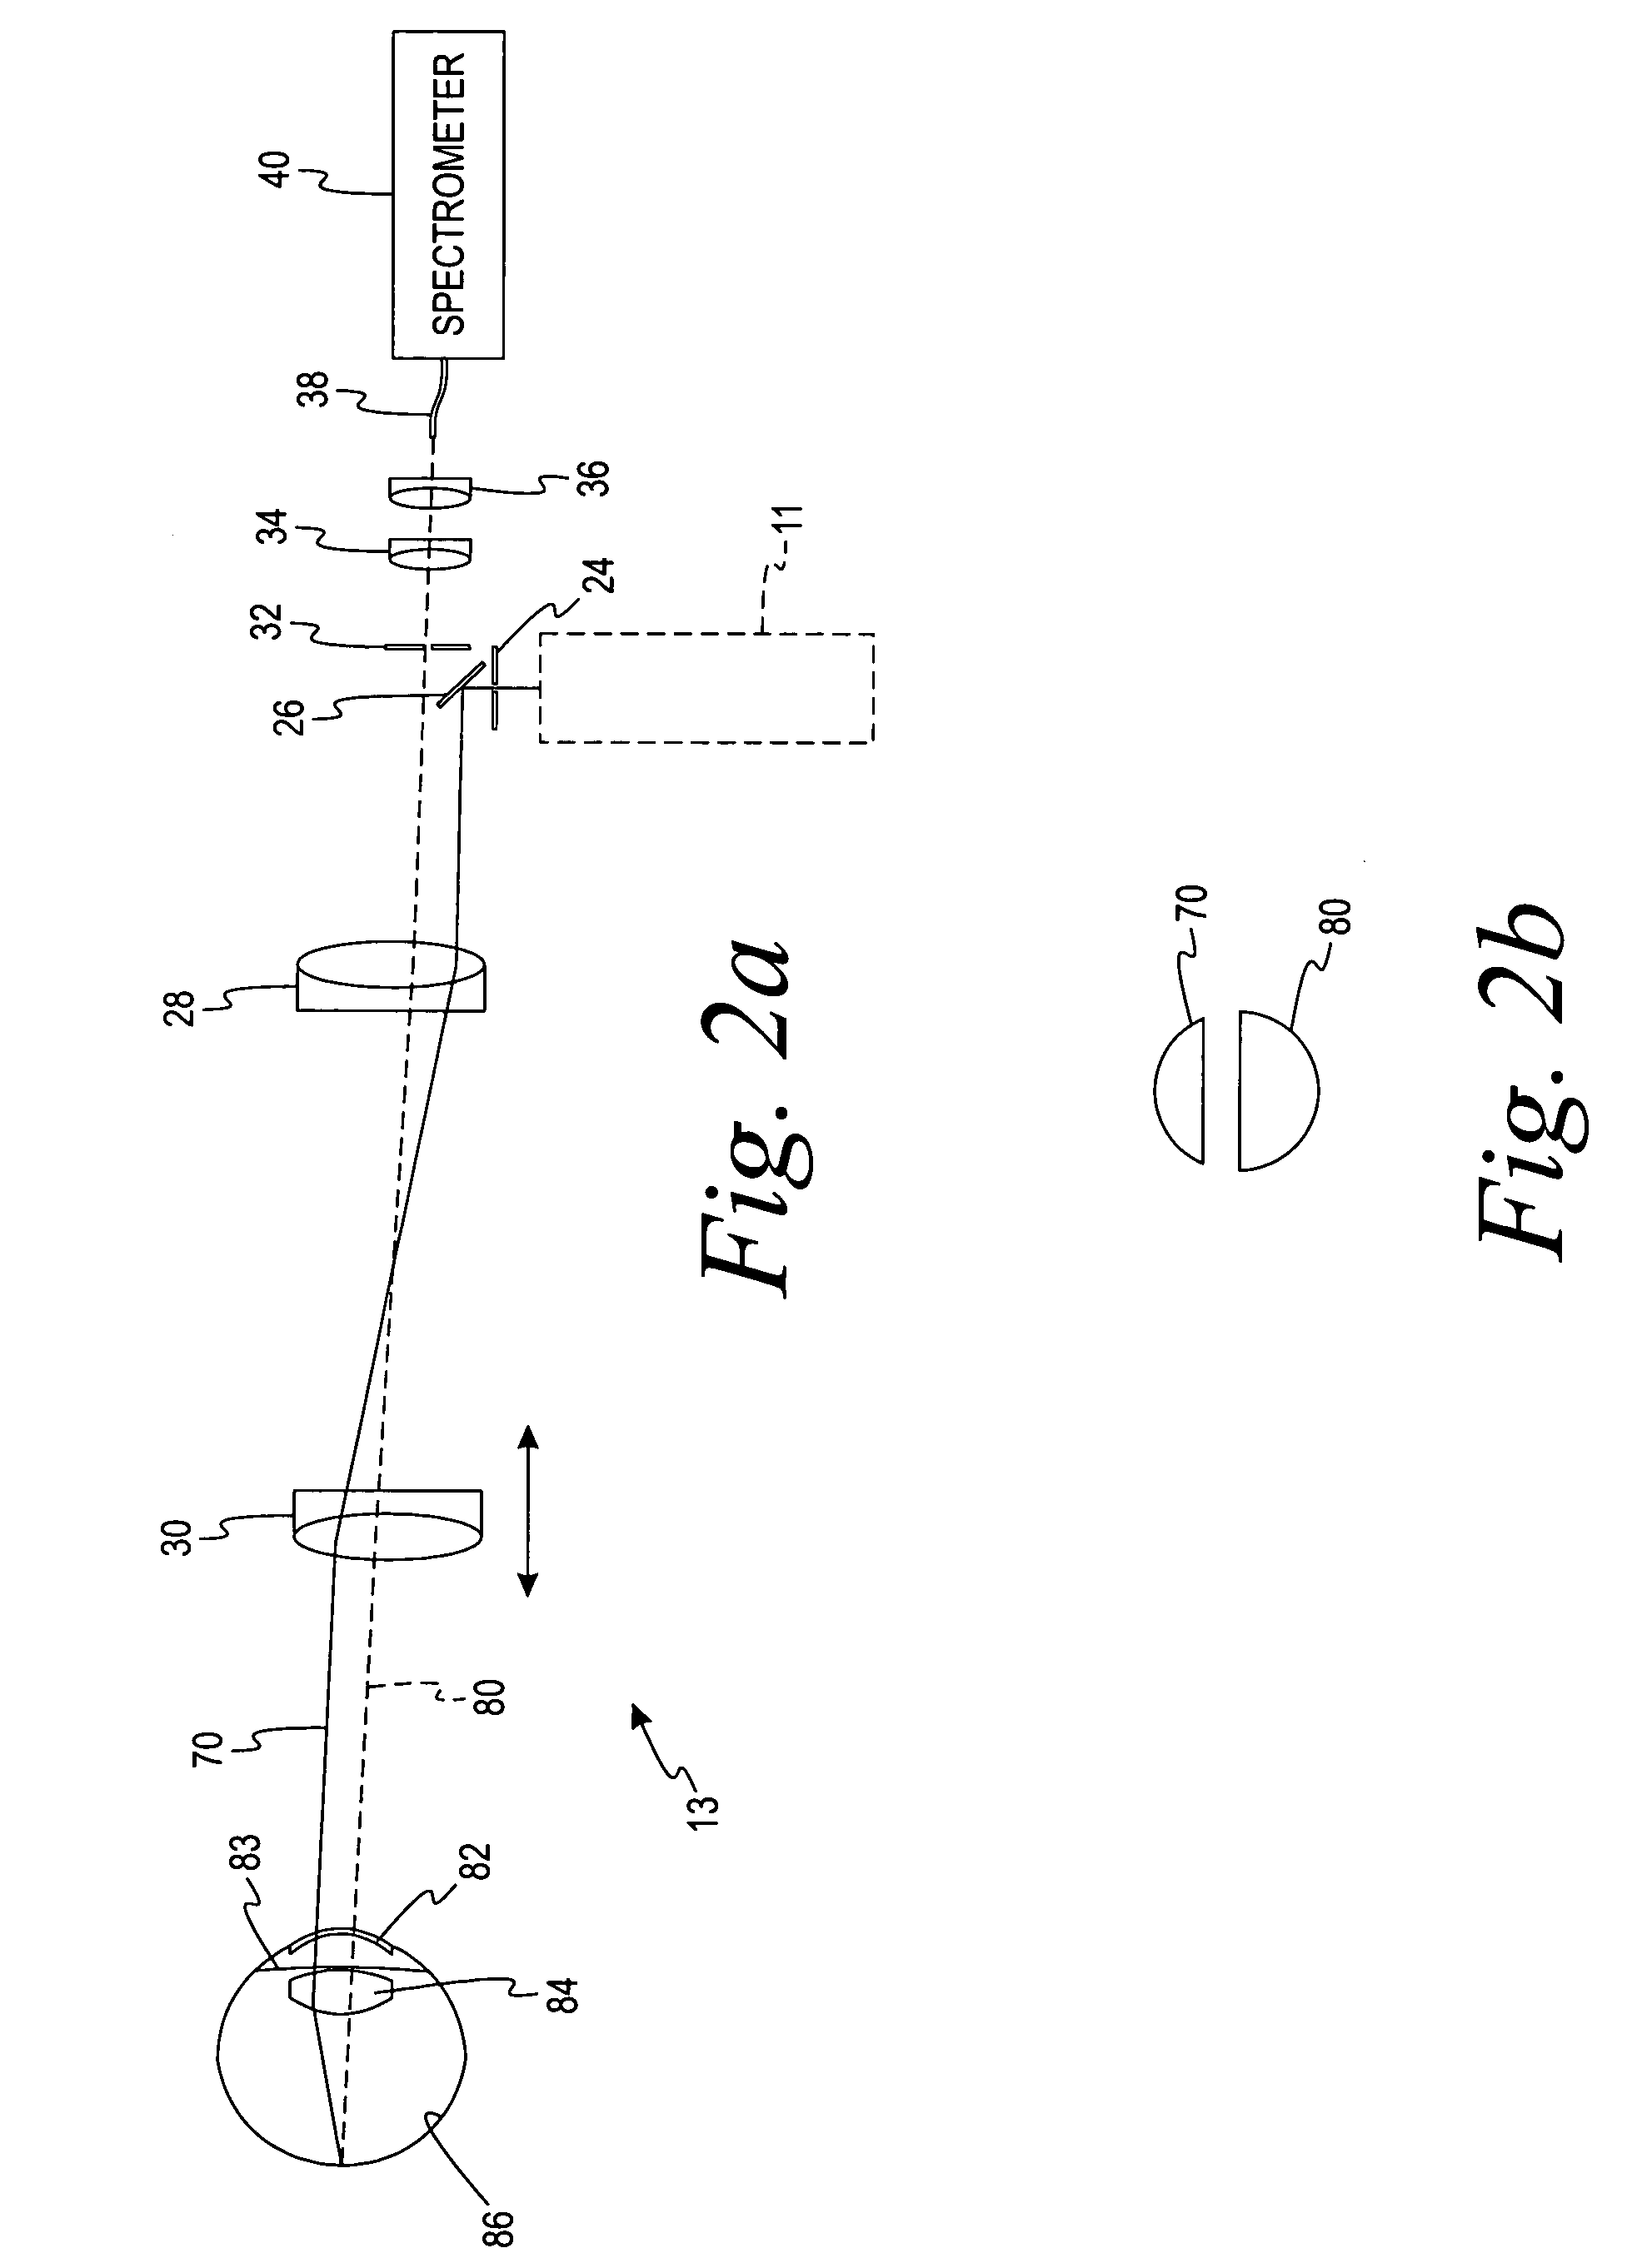 Reflectometry instrument and method for measuring macular pigment